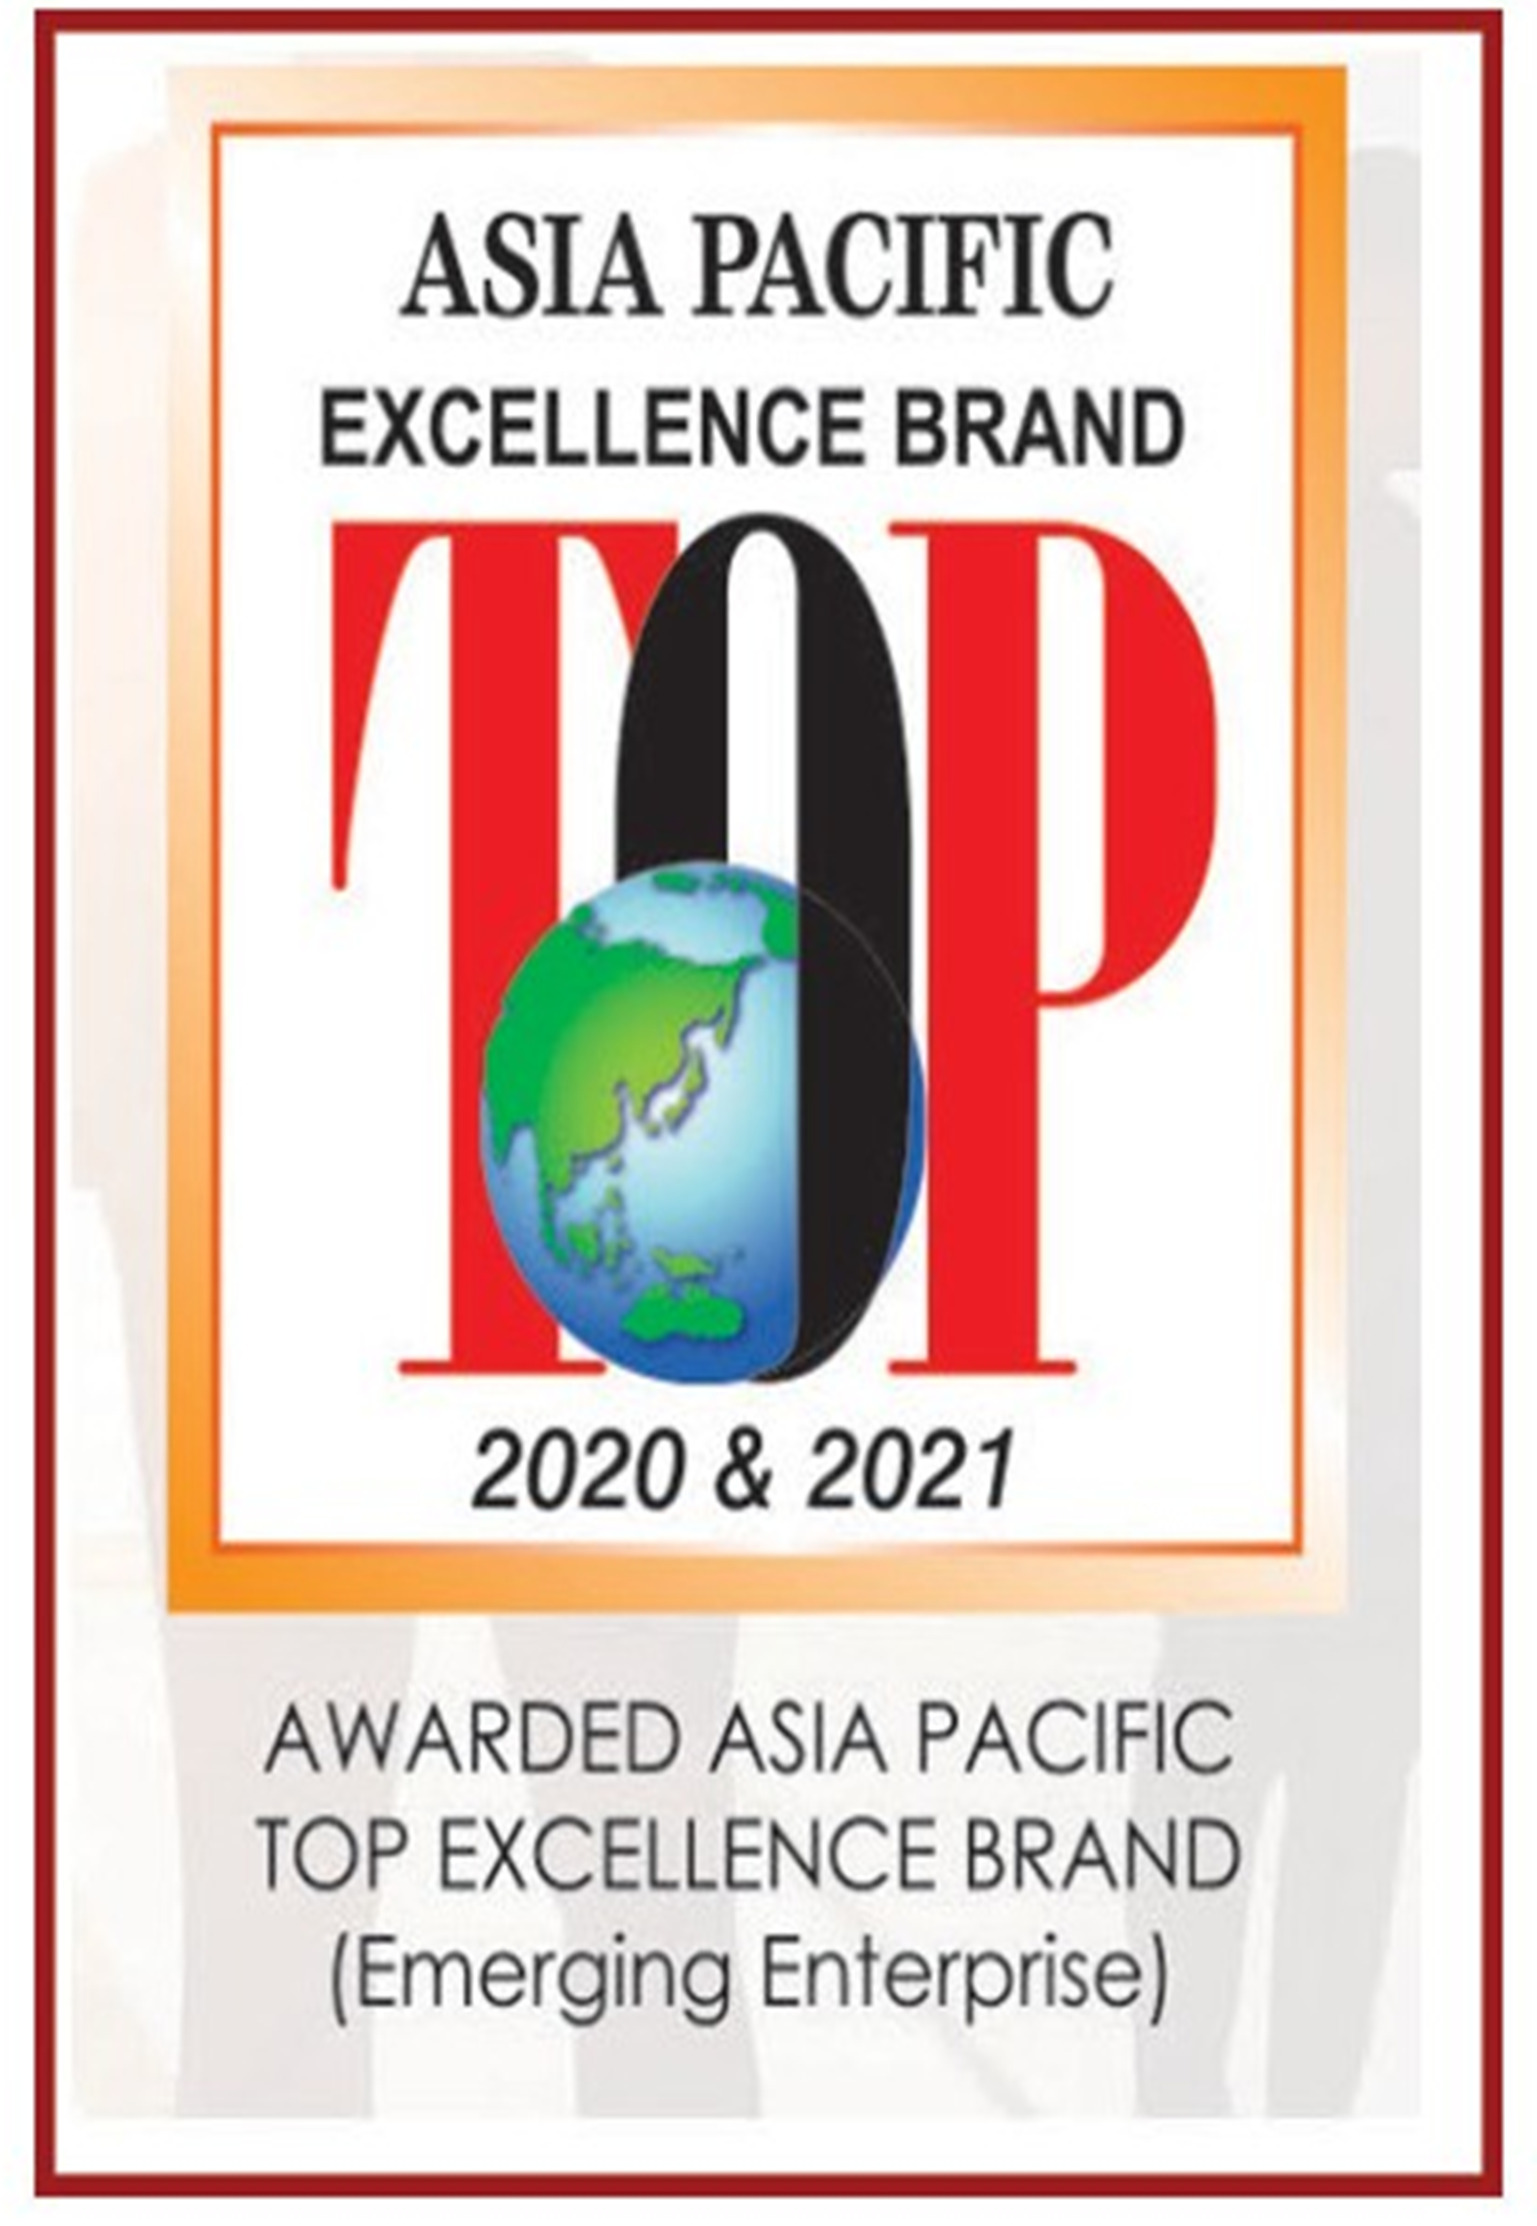 Asia Pacific Excellence Brand 